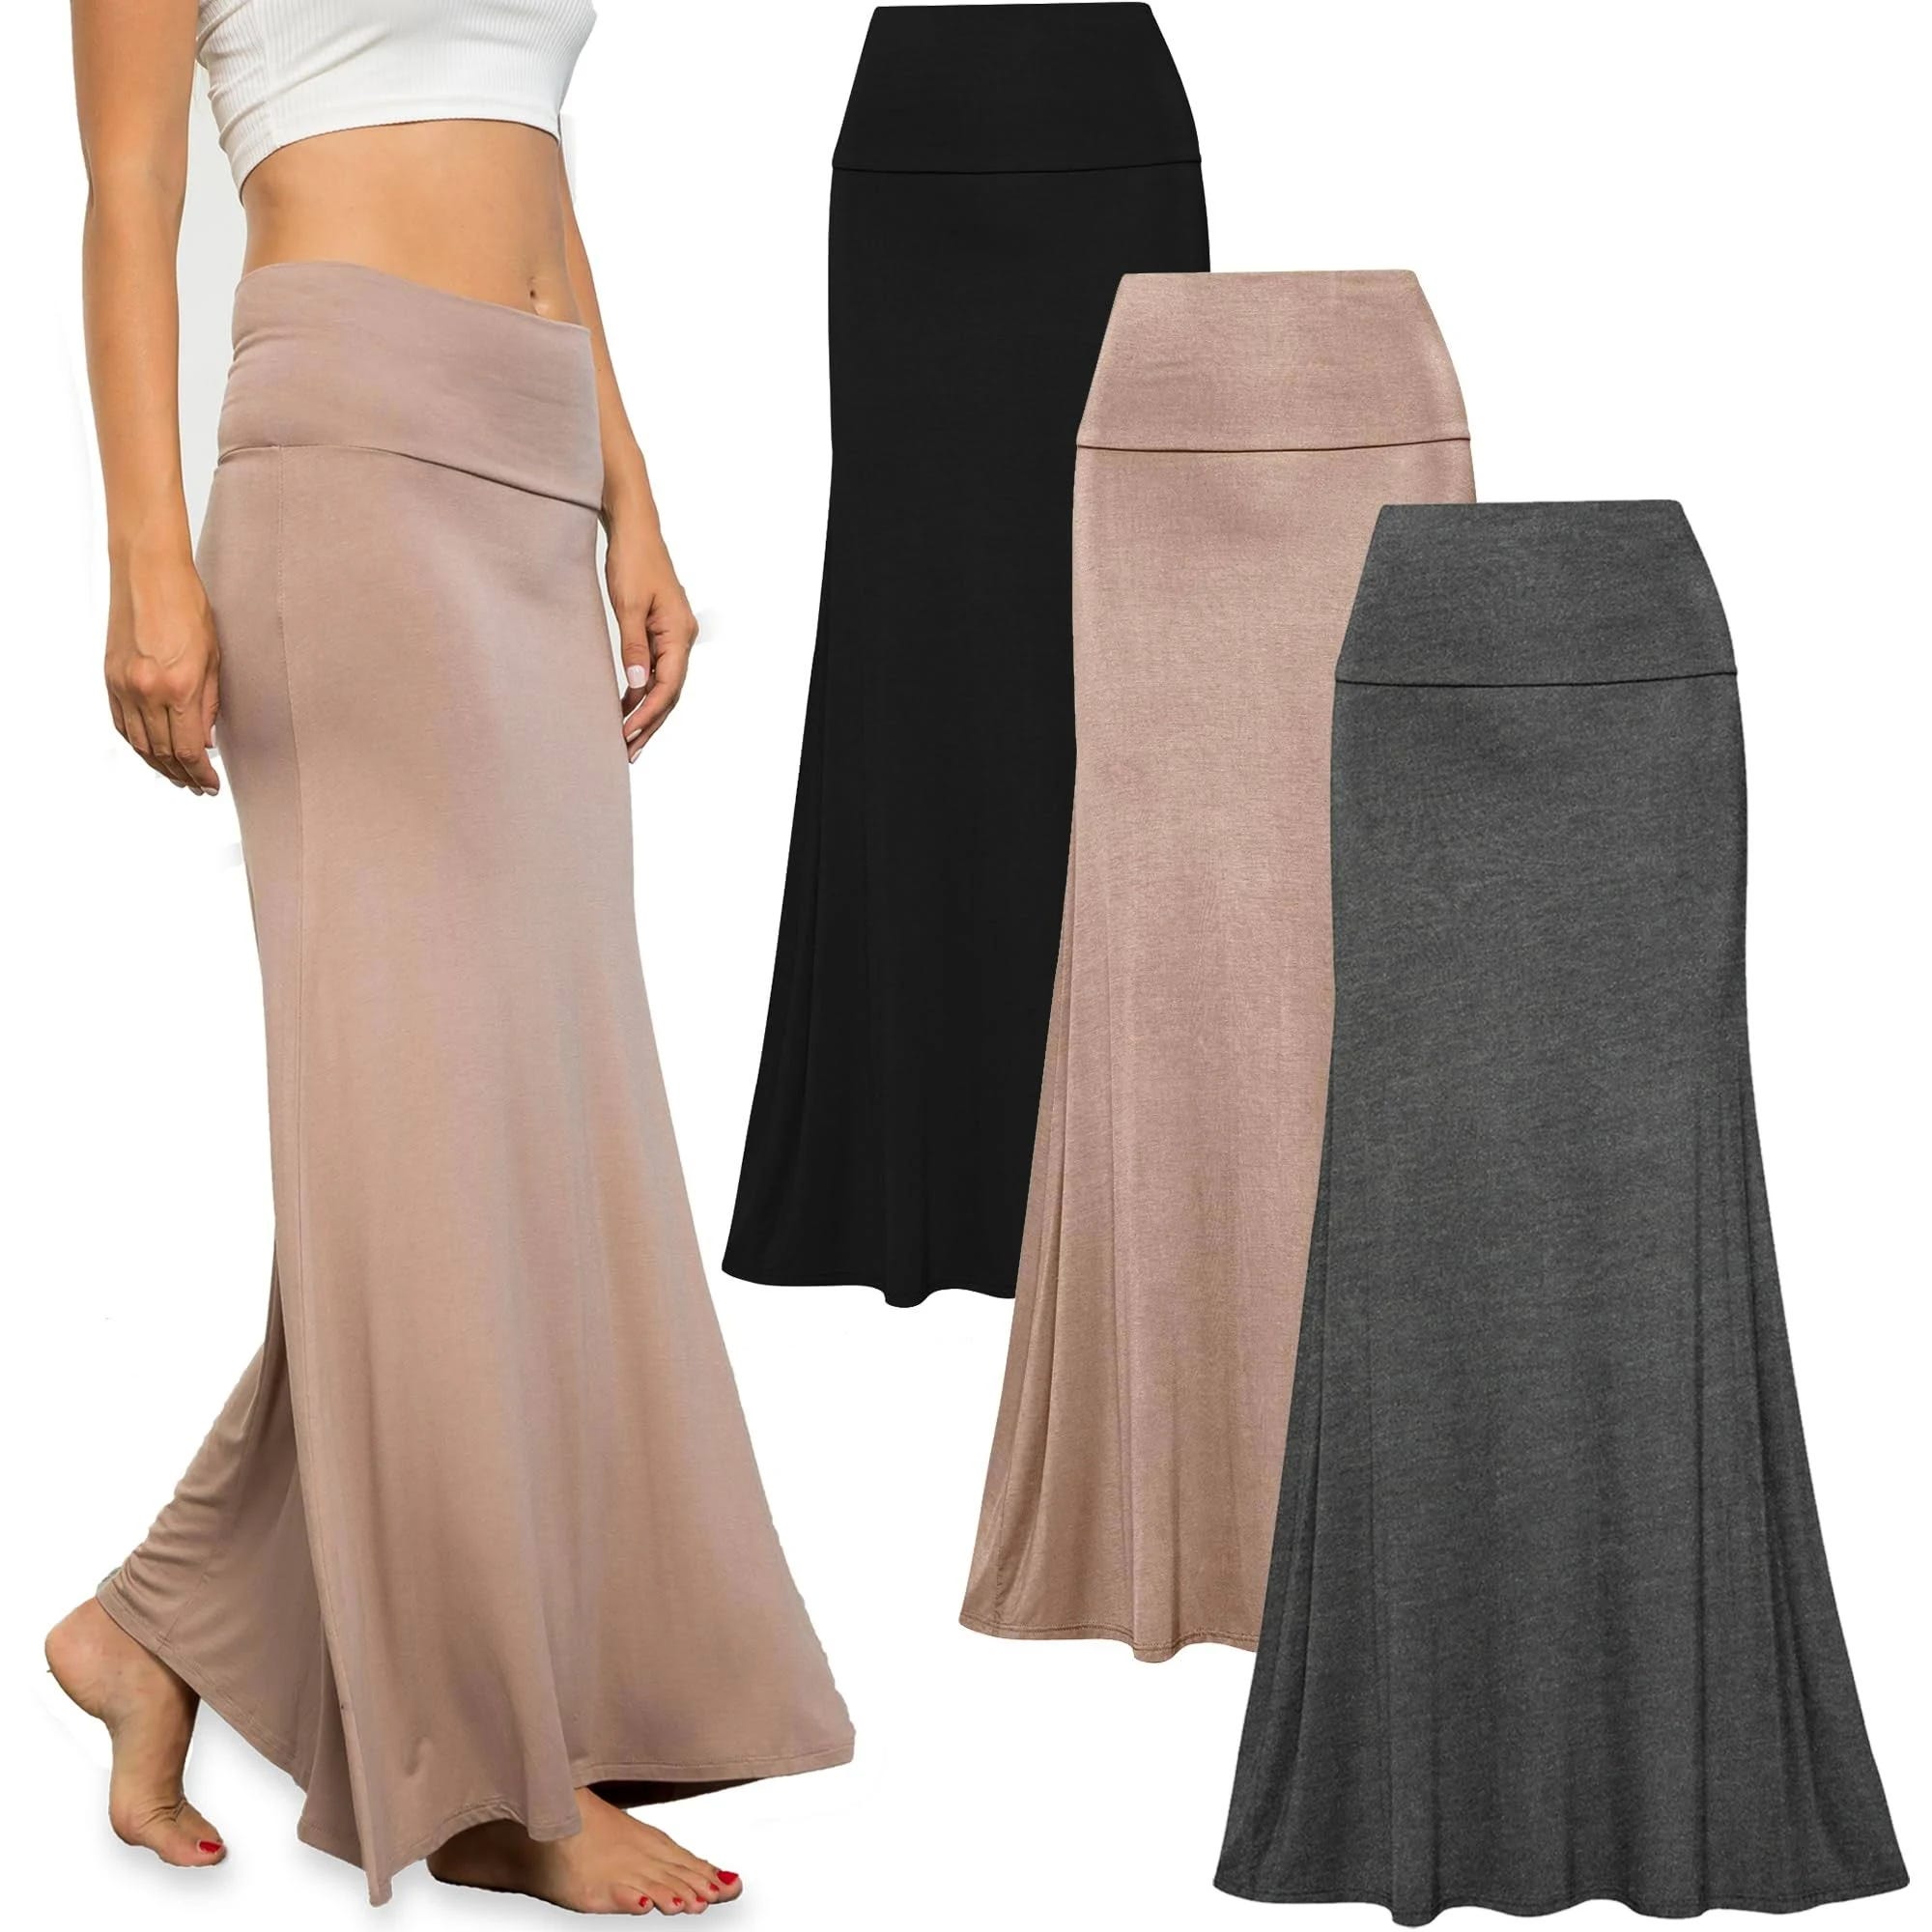 Flare Women's Fold Over Maxi Skirts - Comfortable Stretch High Waist | Image